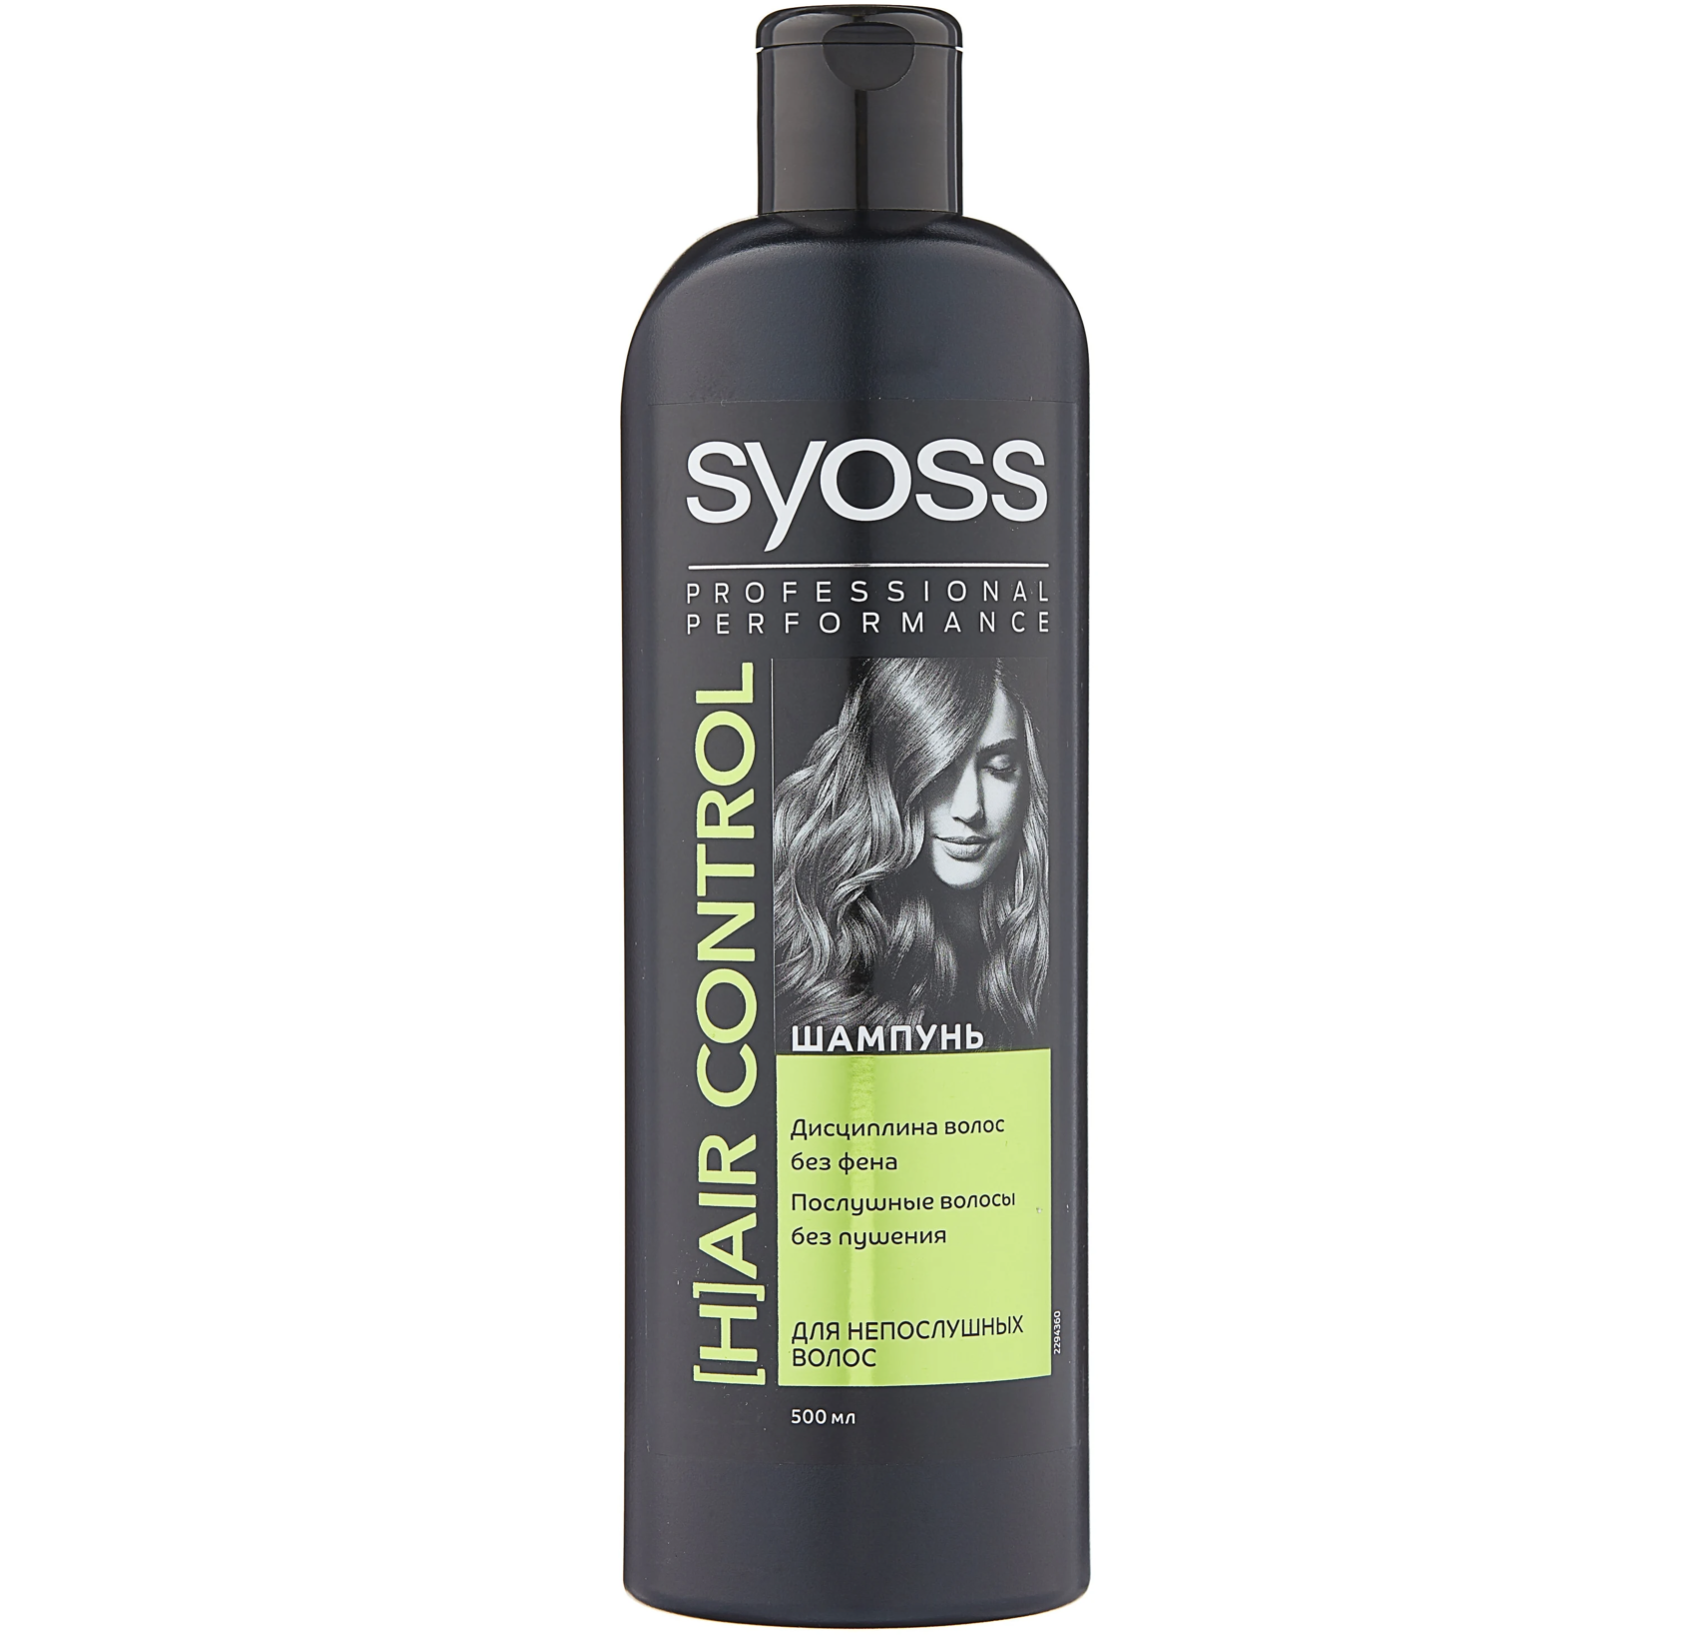   / Syoss Professional Performance -     Hair Control 500 